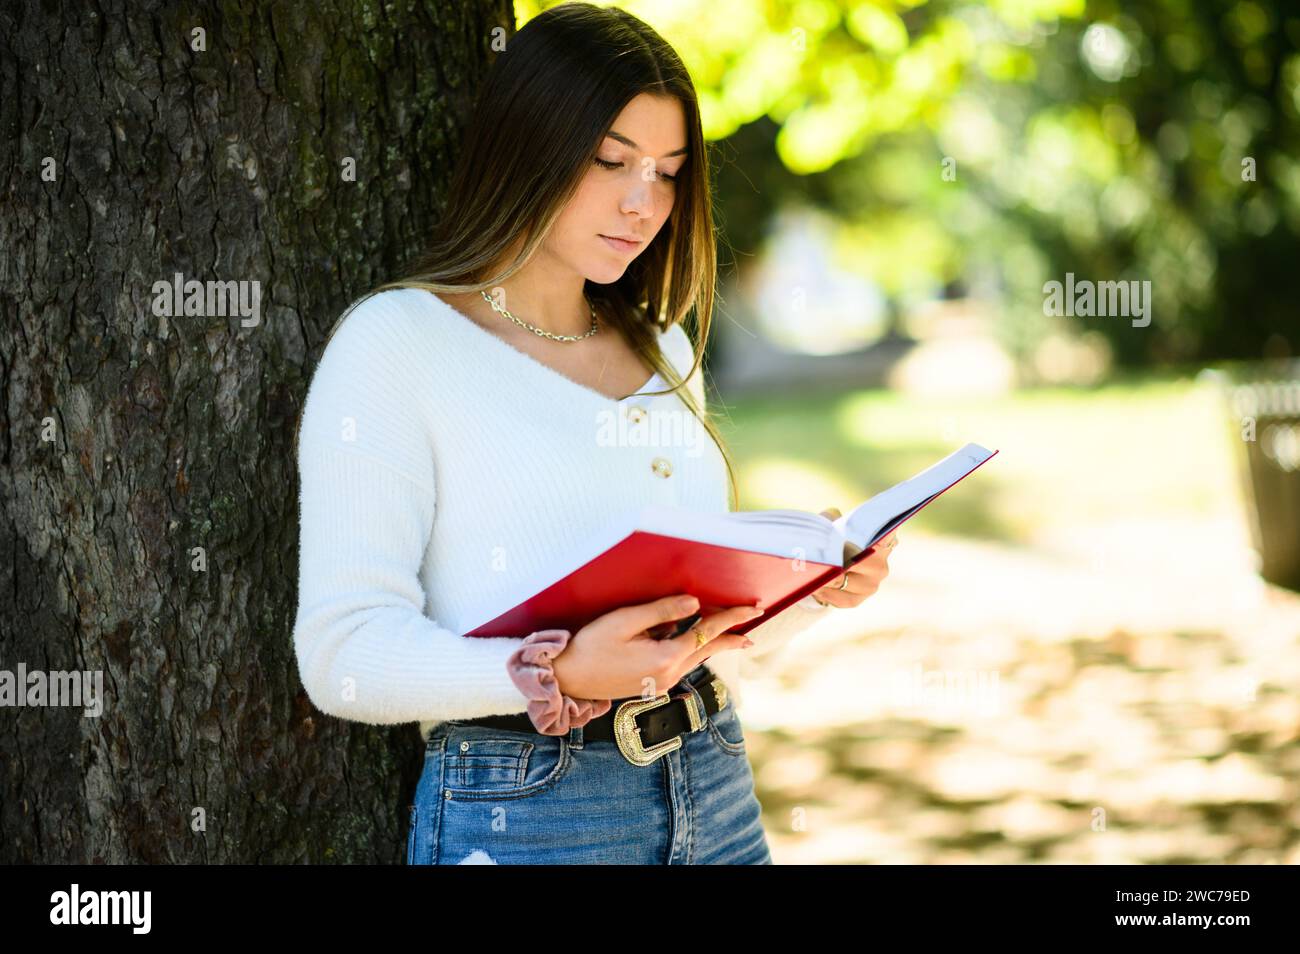 Female student reading a book outdoor in the park near a tree Stock Photo